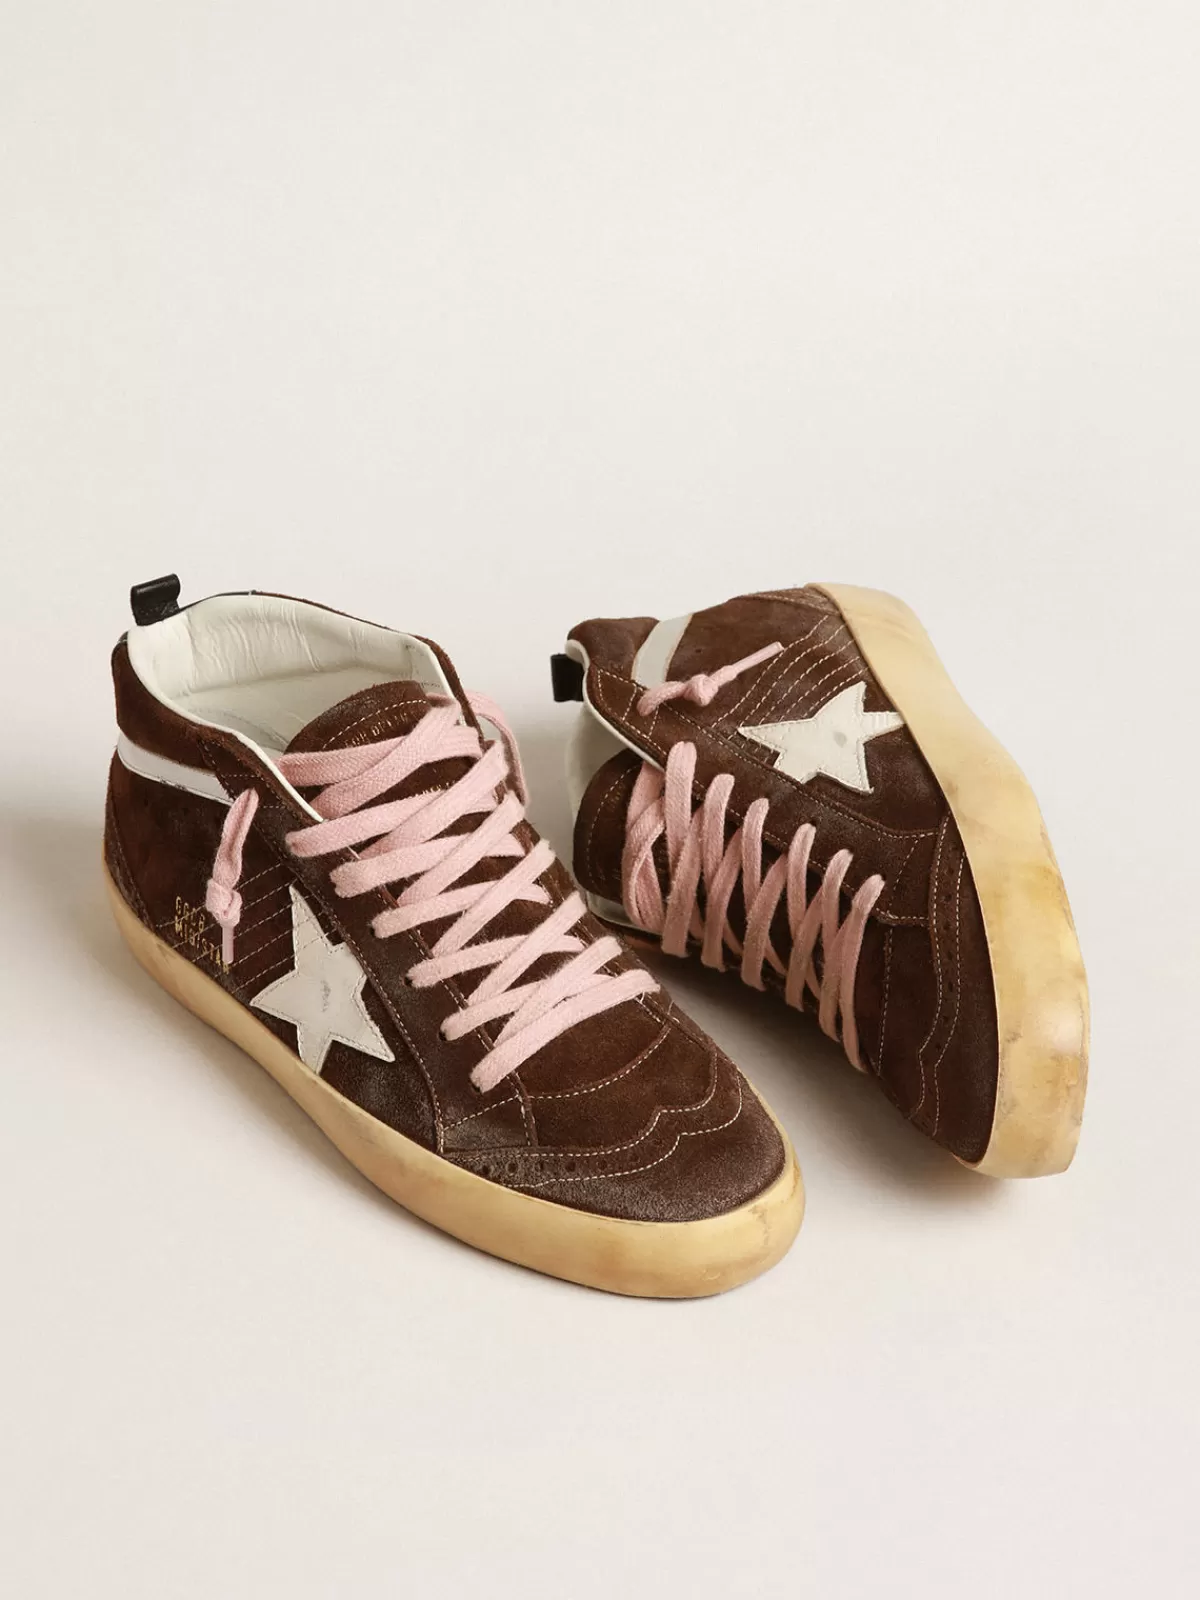 Golden Goose Mid Star in brown suede with white leather star Shop